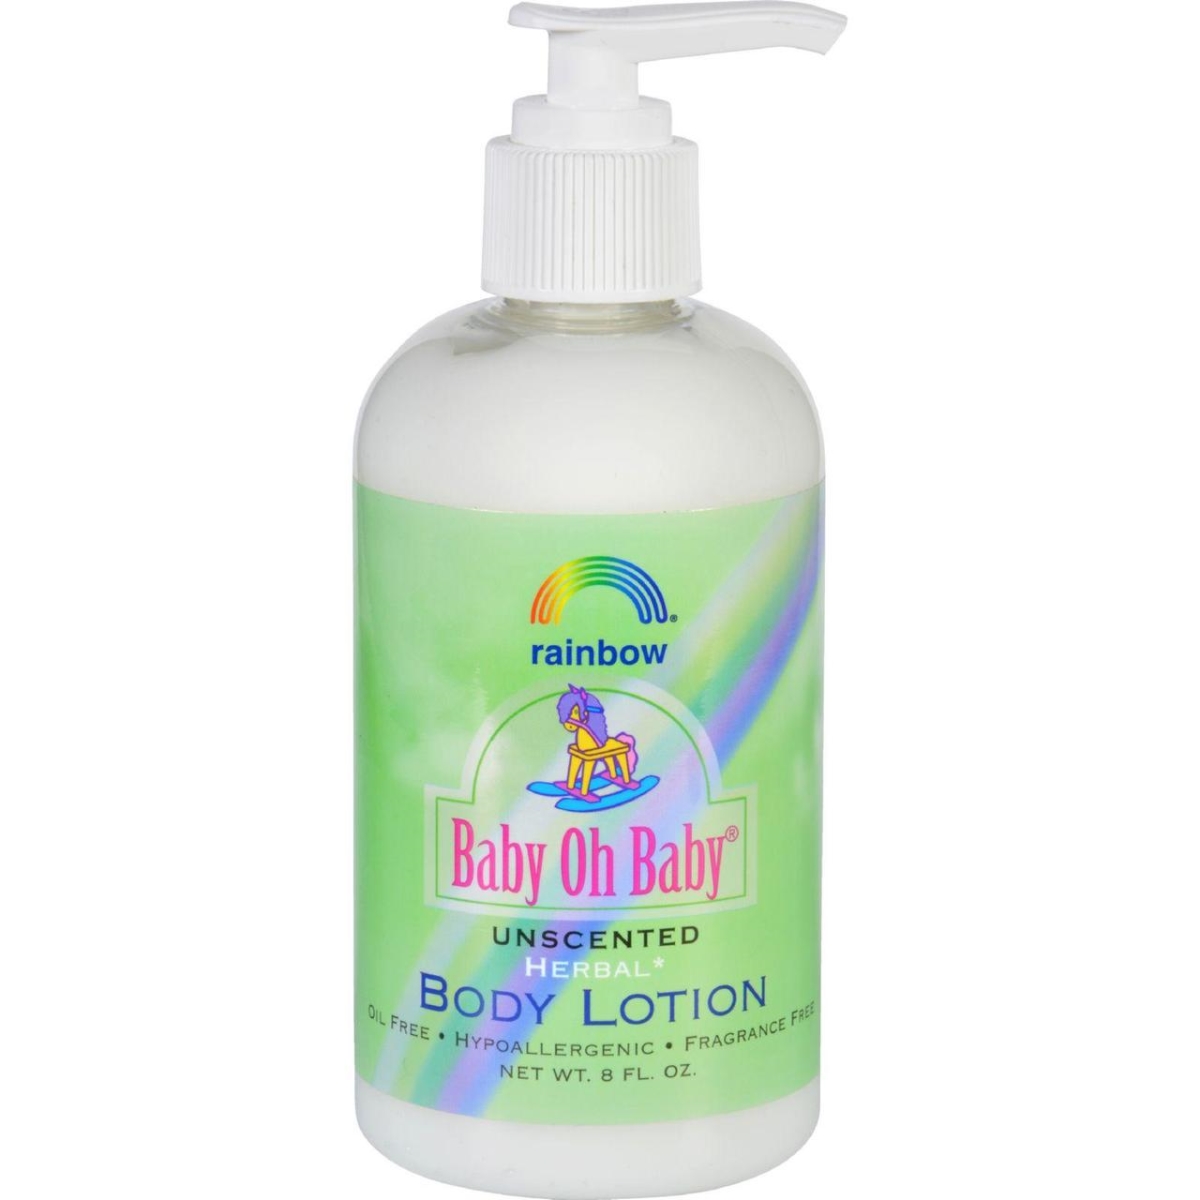 Hg0941526 8 Fl Oz Organic Herbal Baby Body Lotion - Unscented